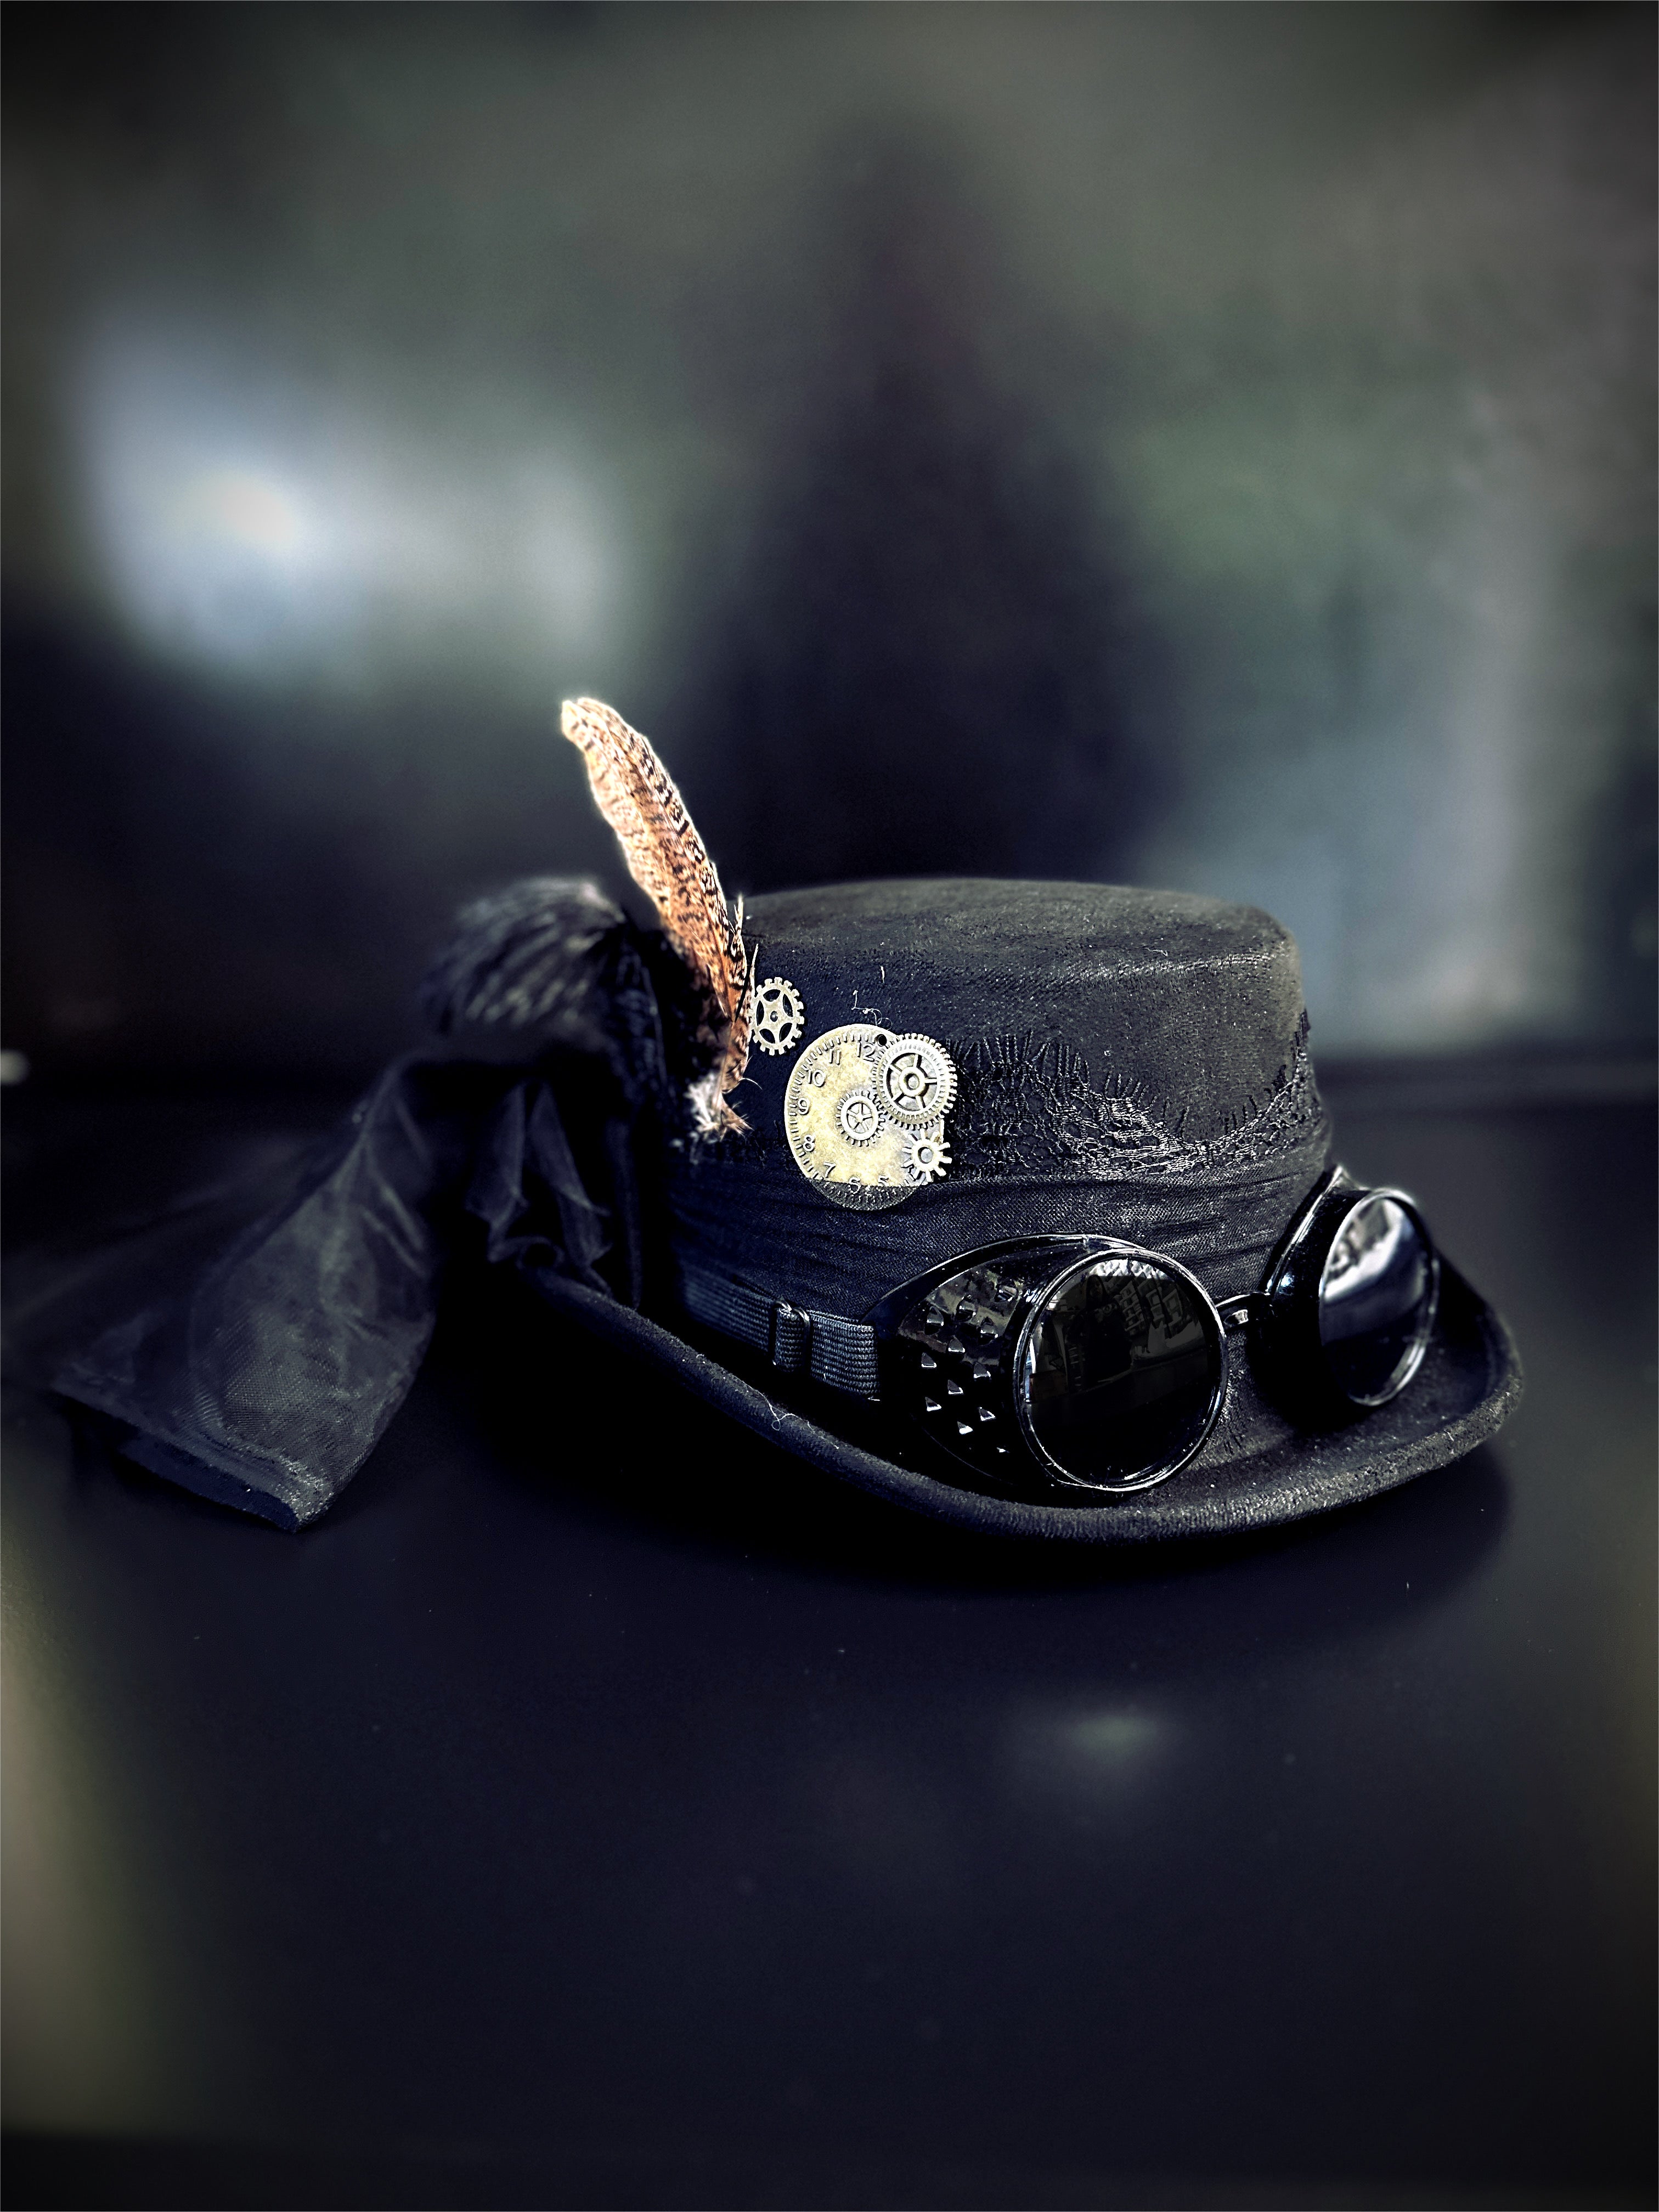 Black steampunk hat with a veil and goggles.